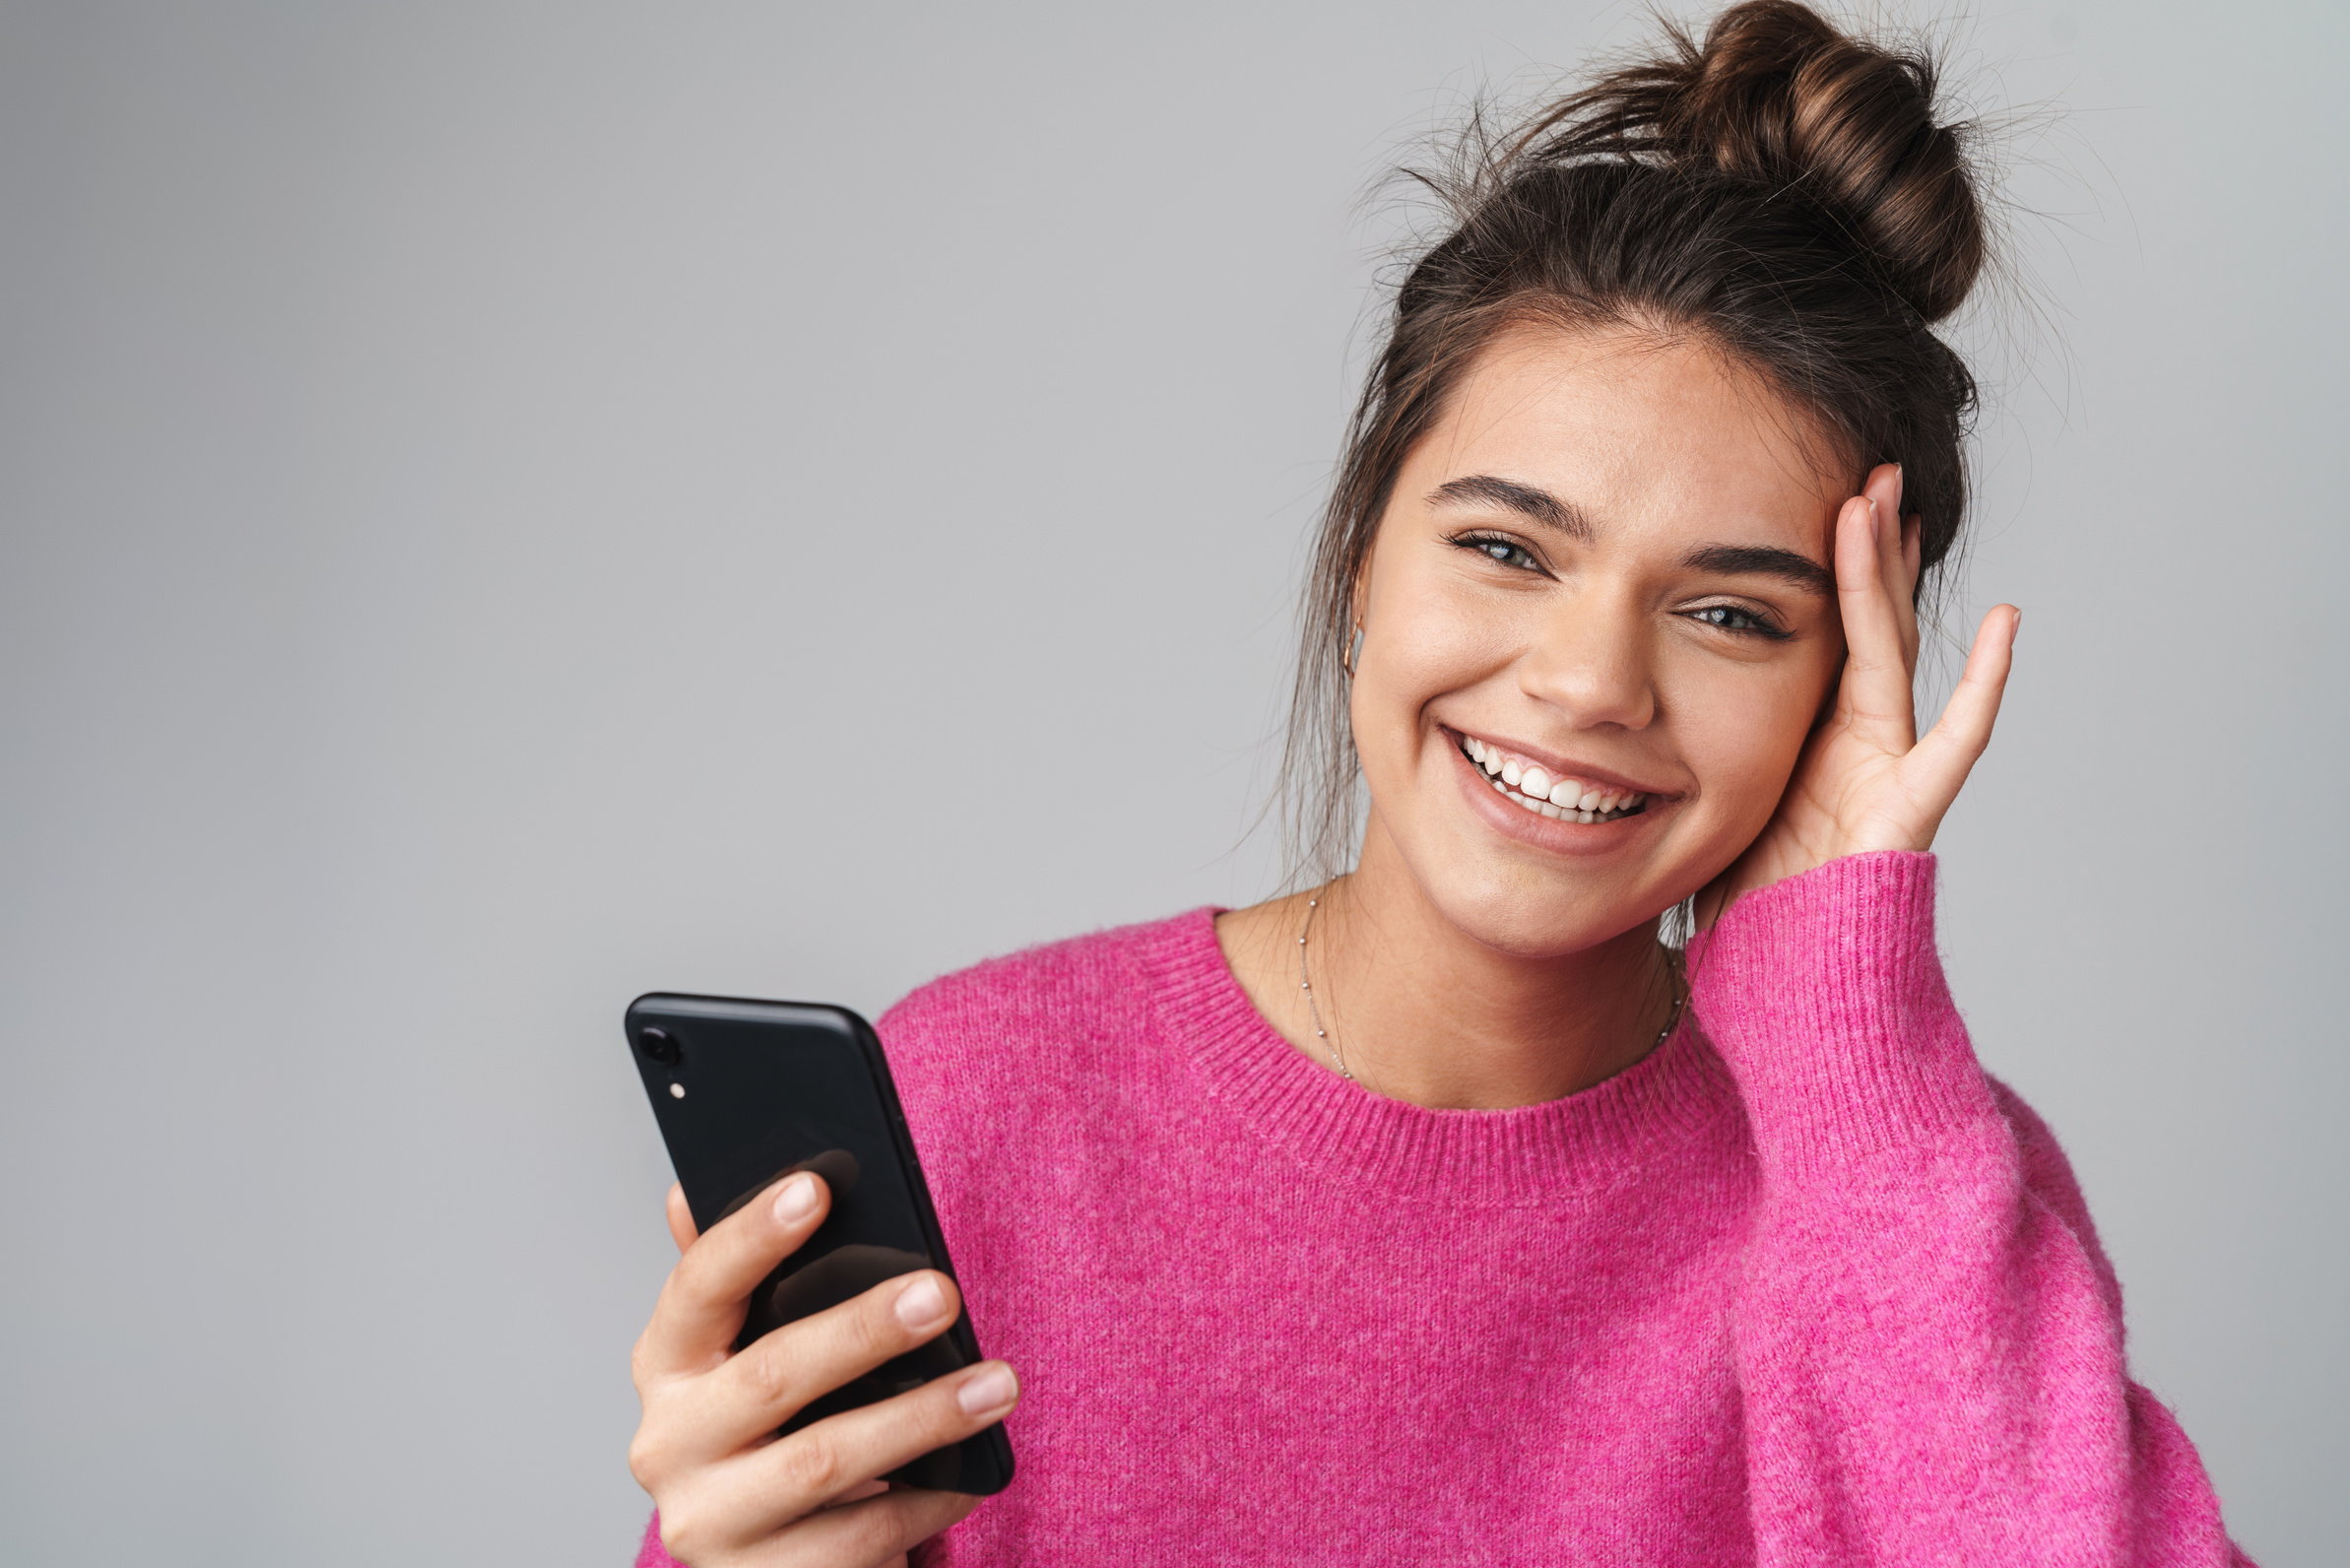 Woman Using Cellphone and Smiling